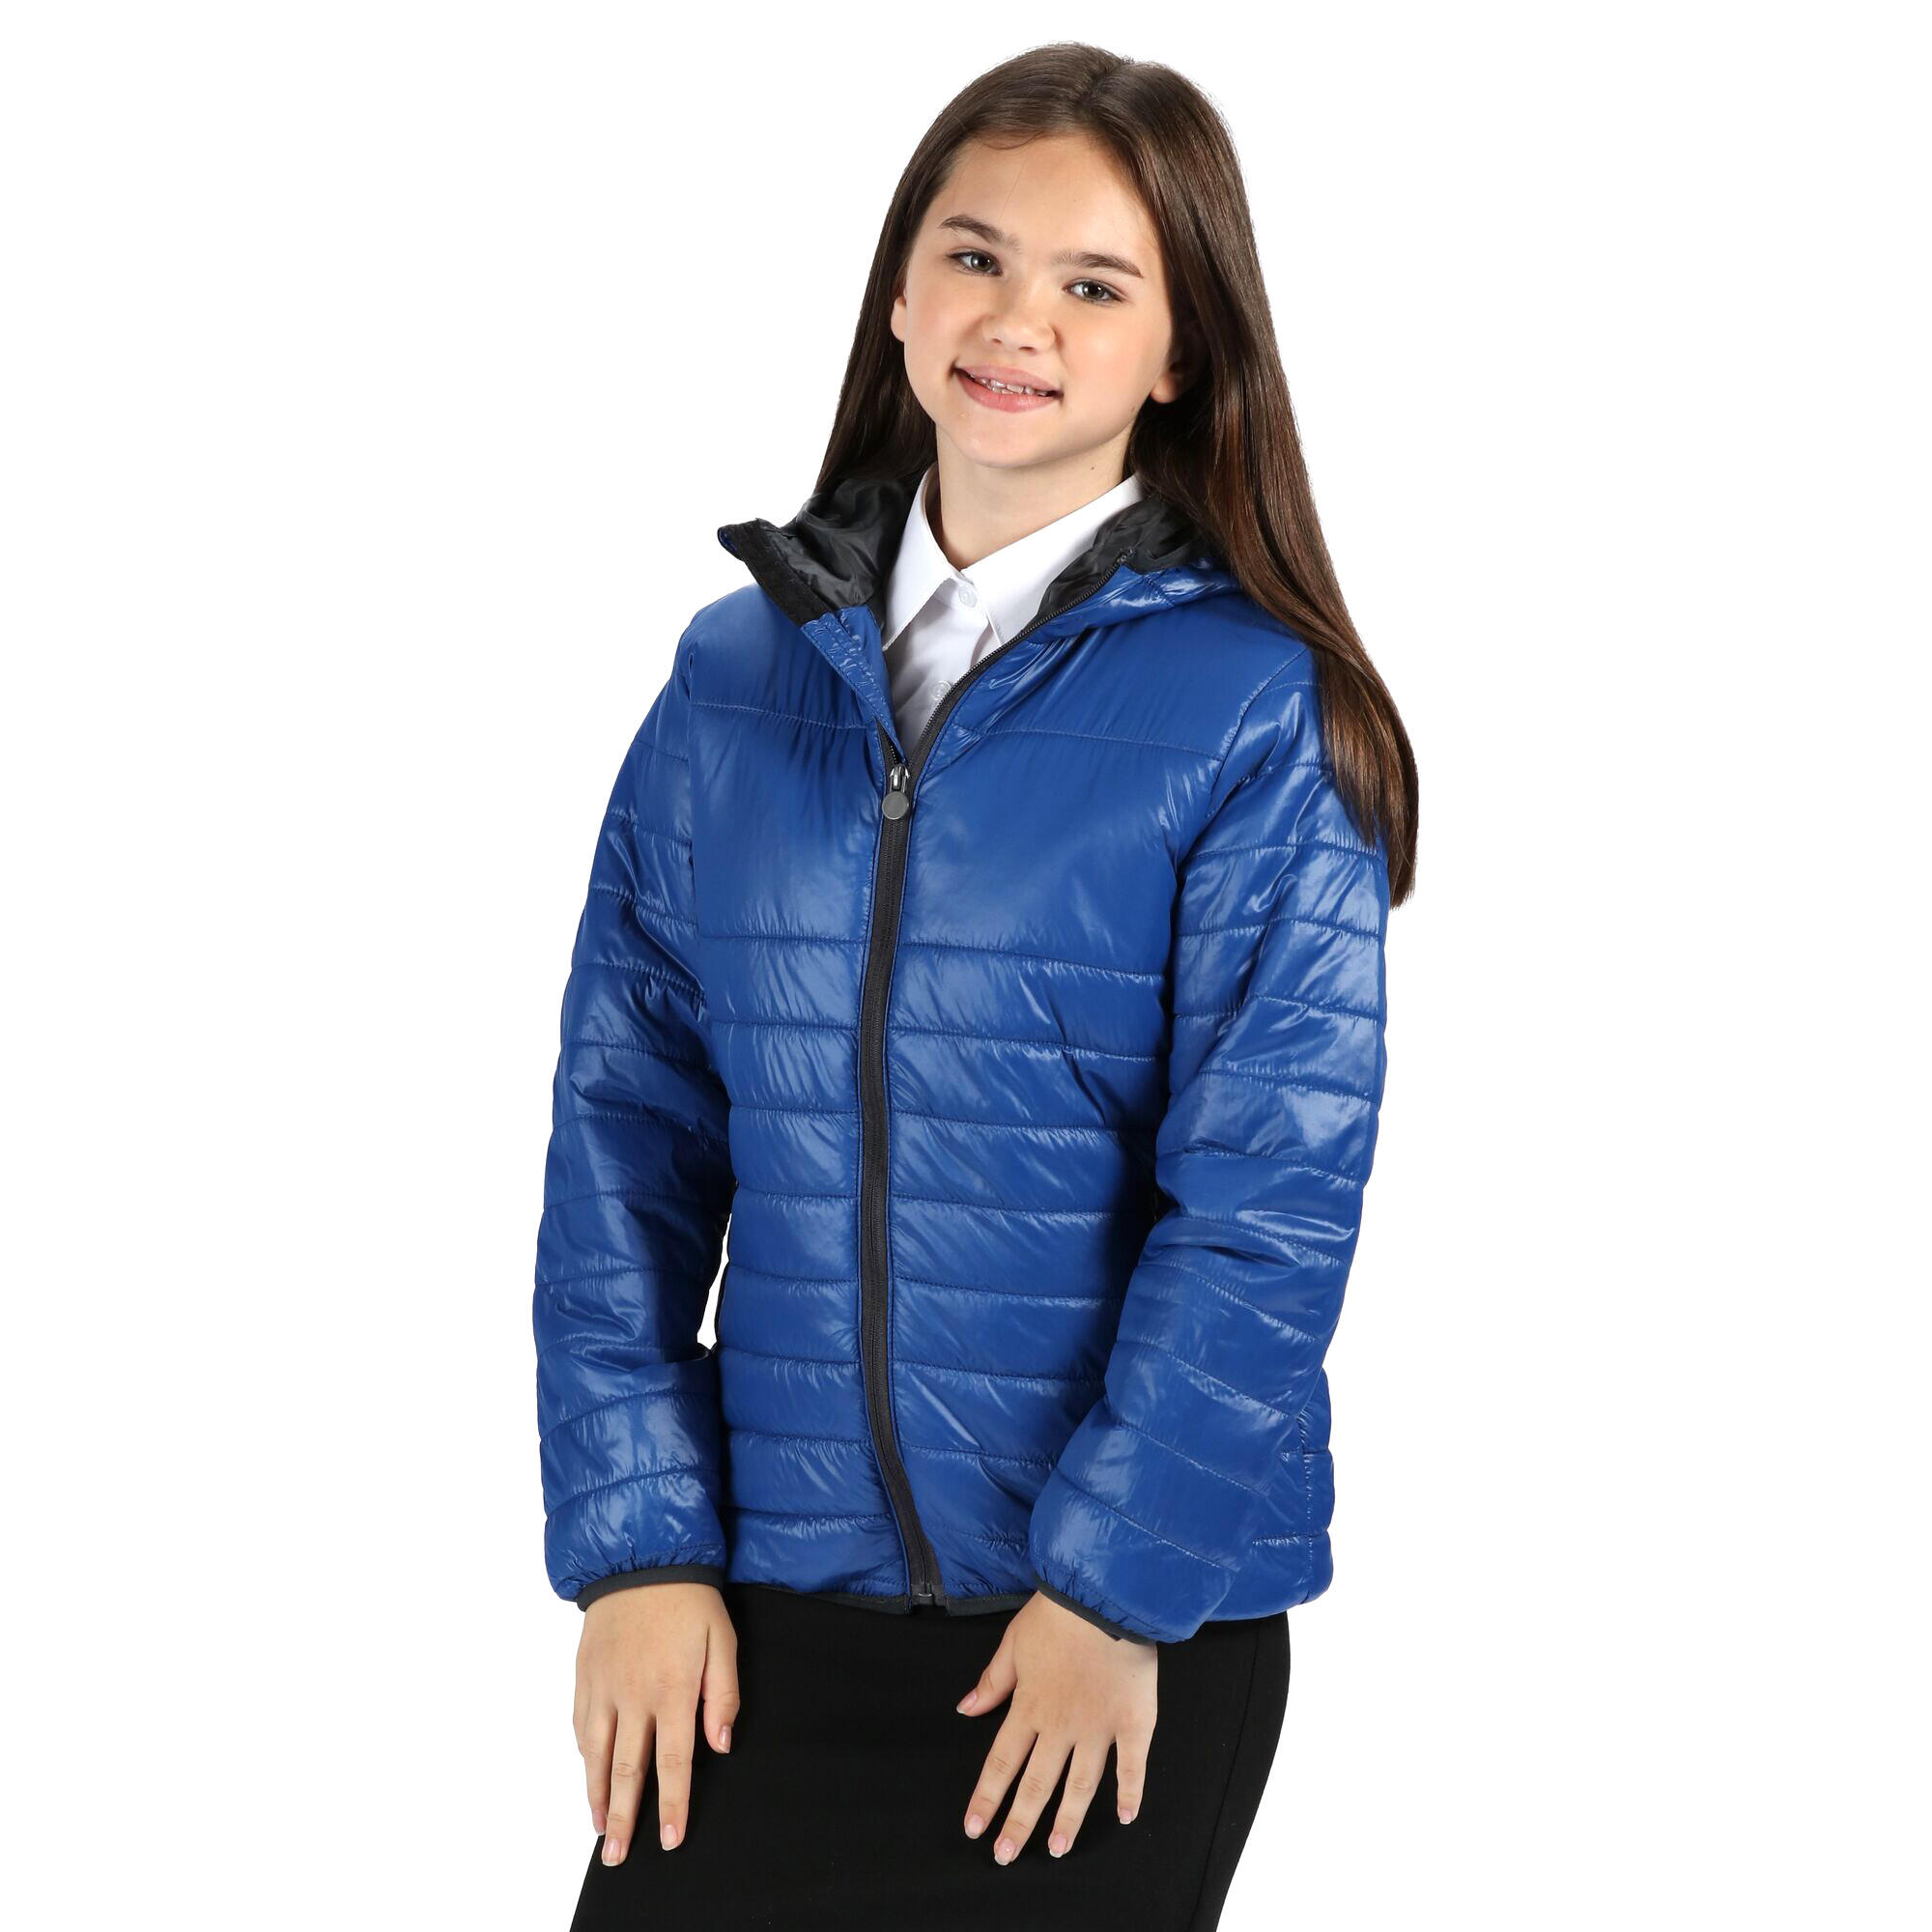 Childrens/Kids Stormforce Thermal Insulated Jacket (Royal Blue) 1/4